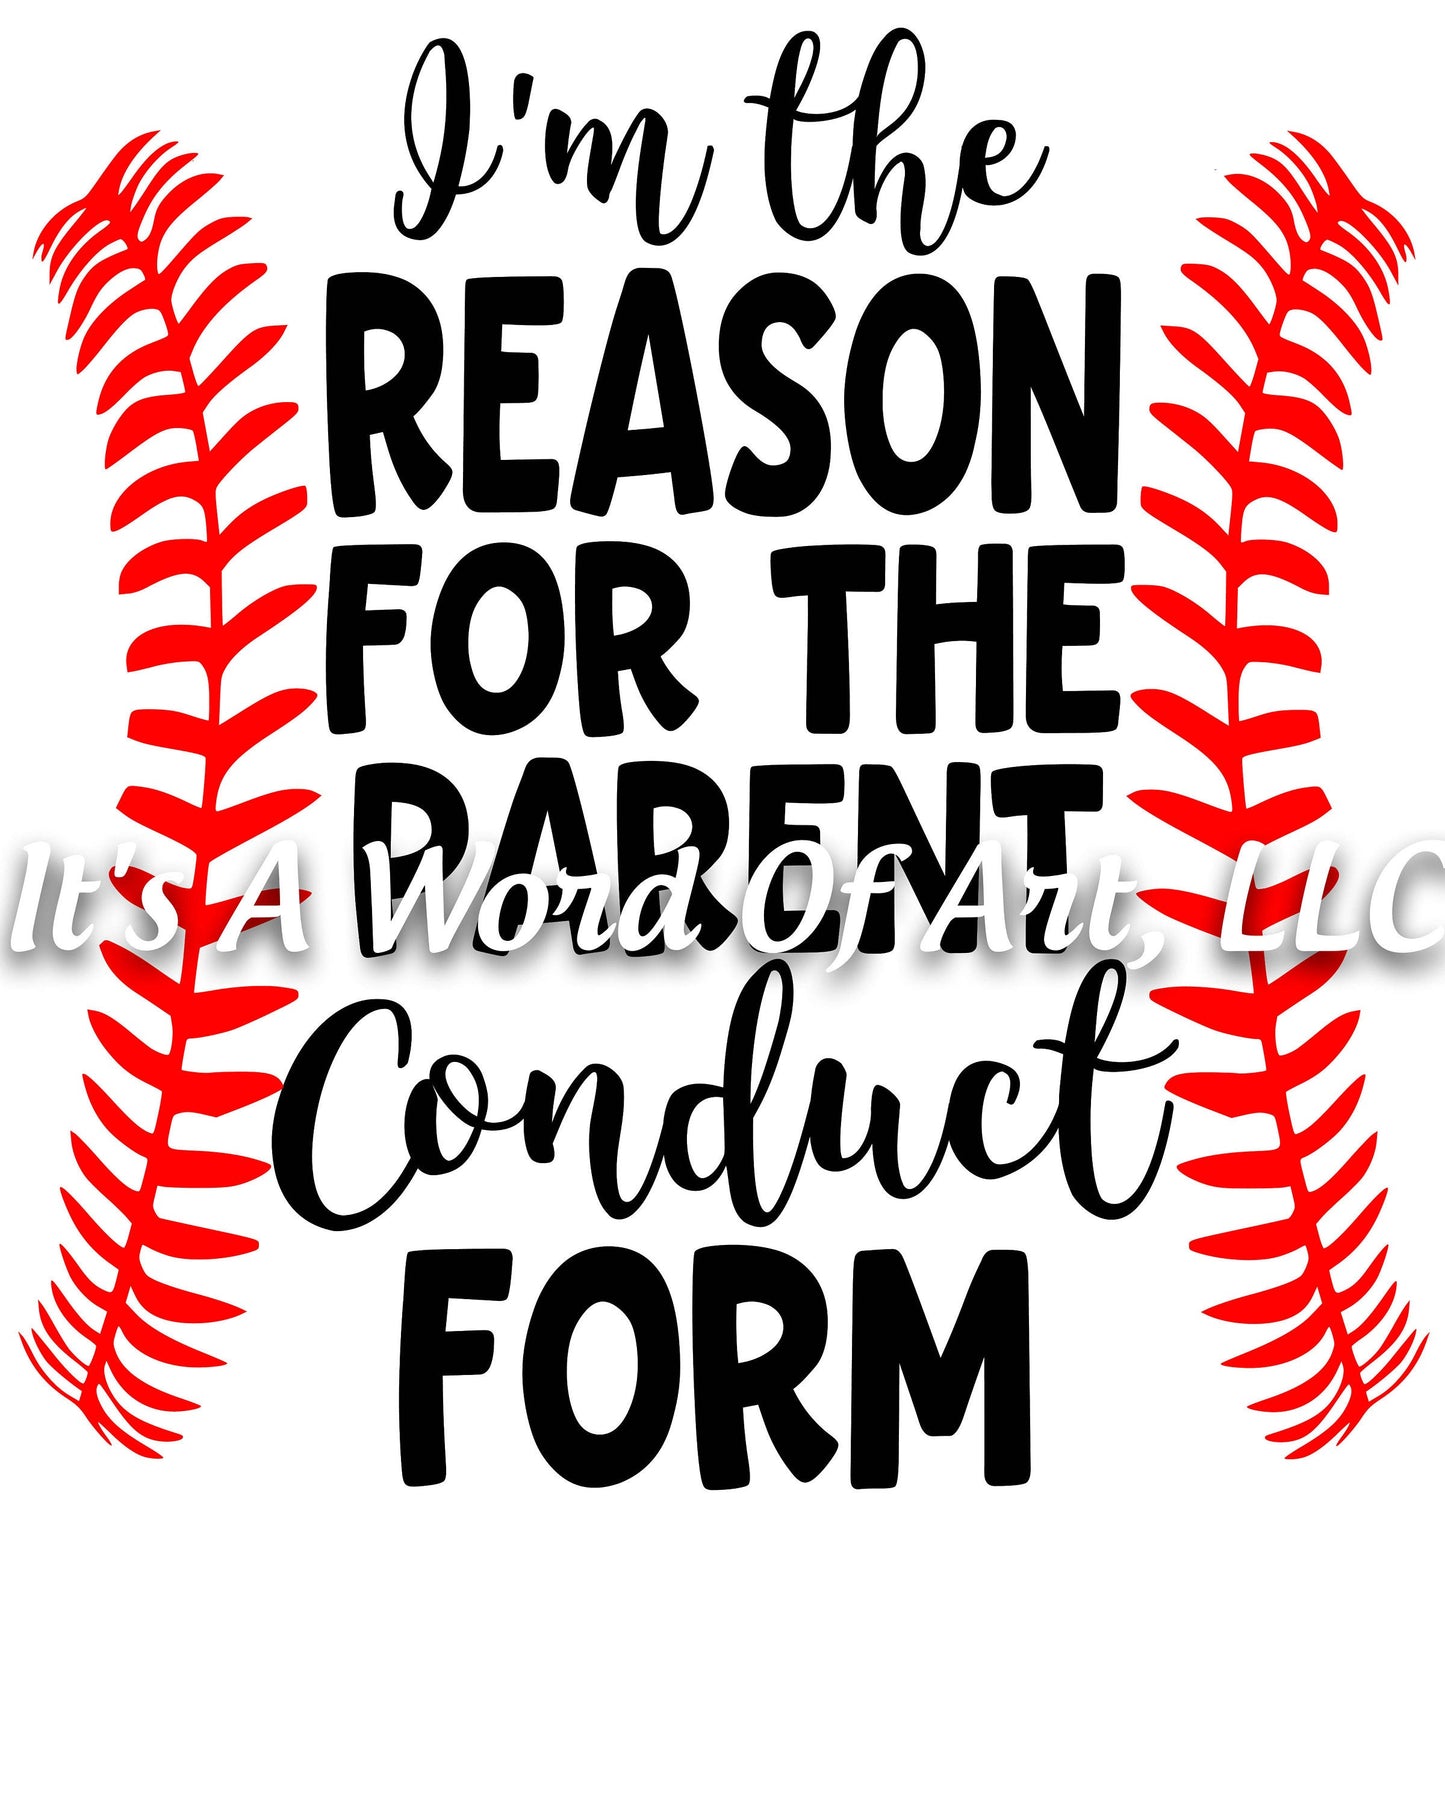 Baseball 15 - I'm The Reason For The Parent Conduct Form - Sublimation Transfer Set/Ready To Press Sublimation Transfer/Sublimation Transfer